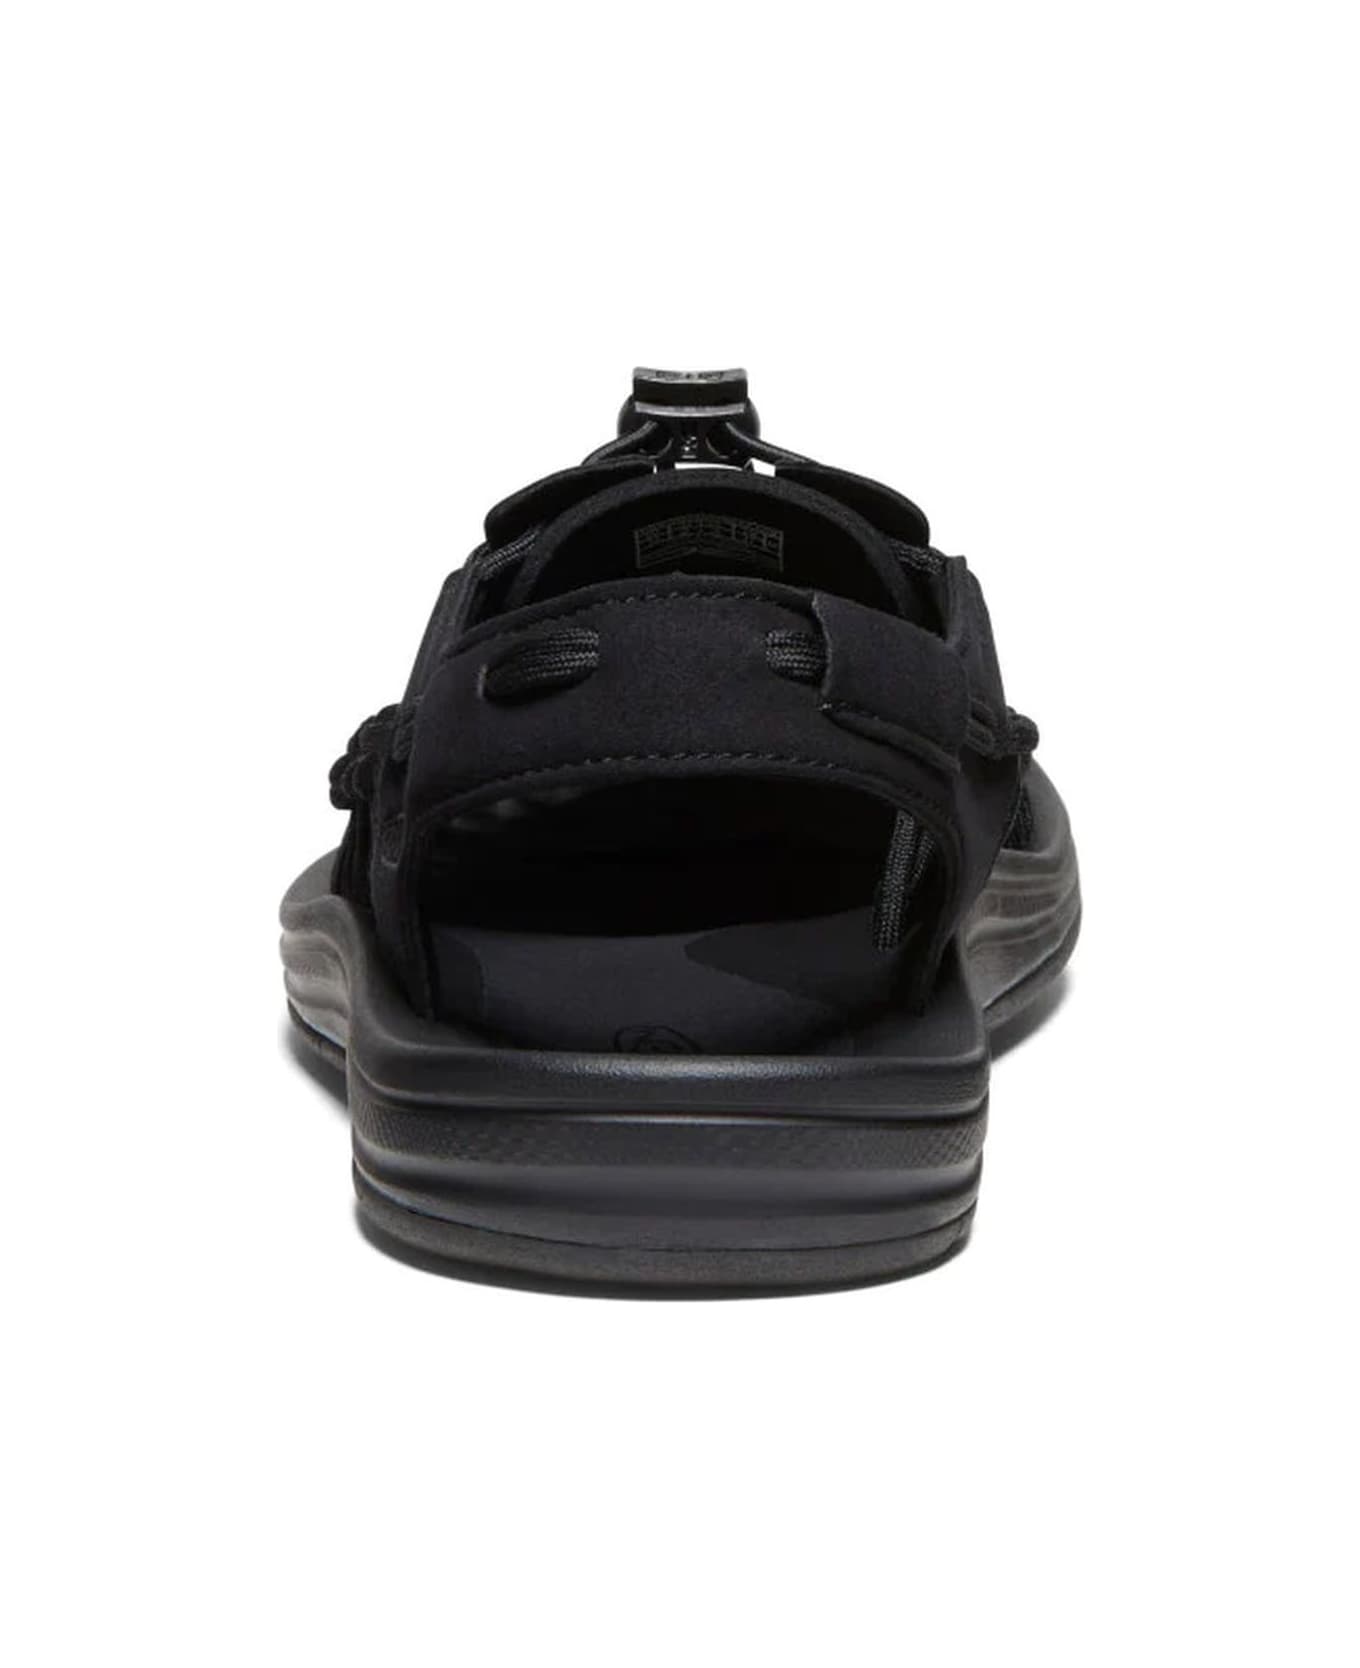 Keen Black Two-cord Construction Sandals - Nero